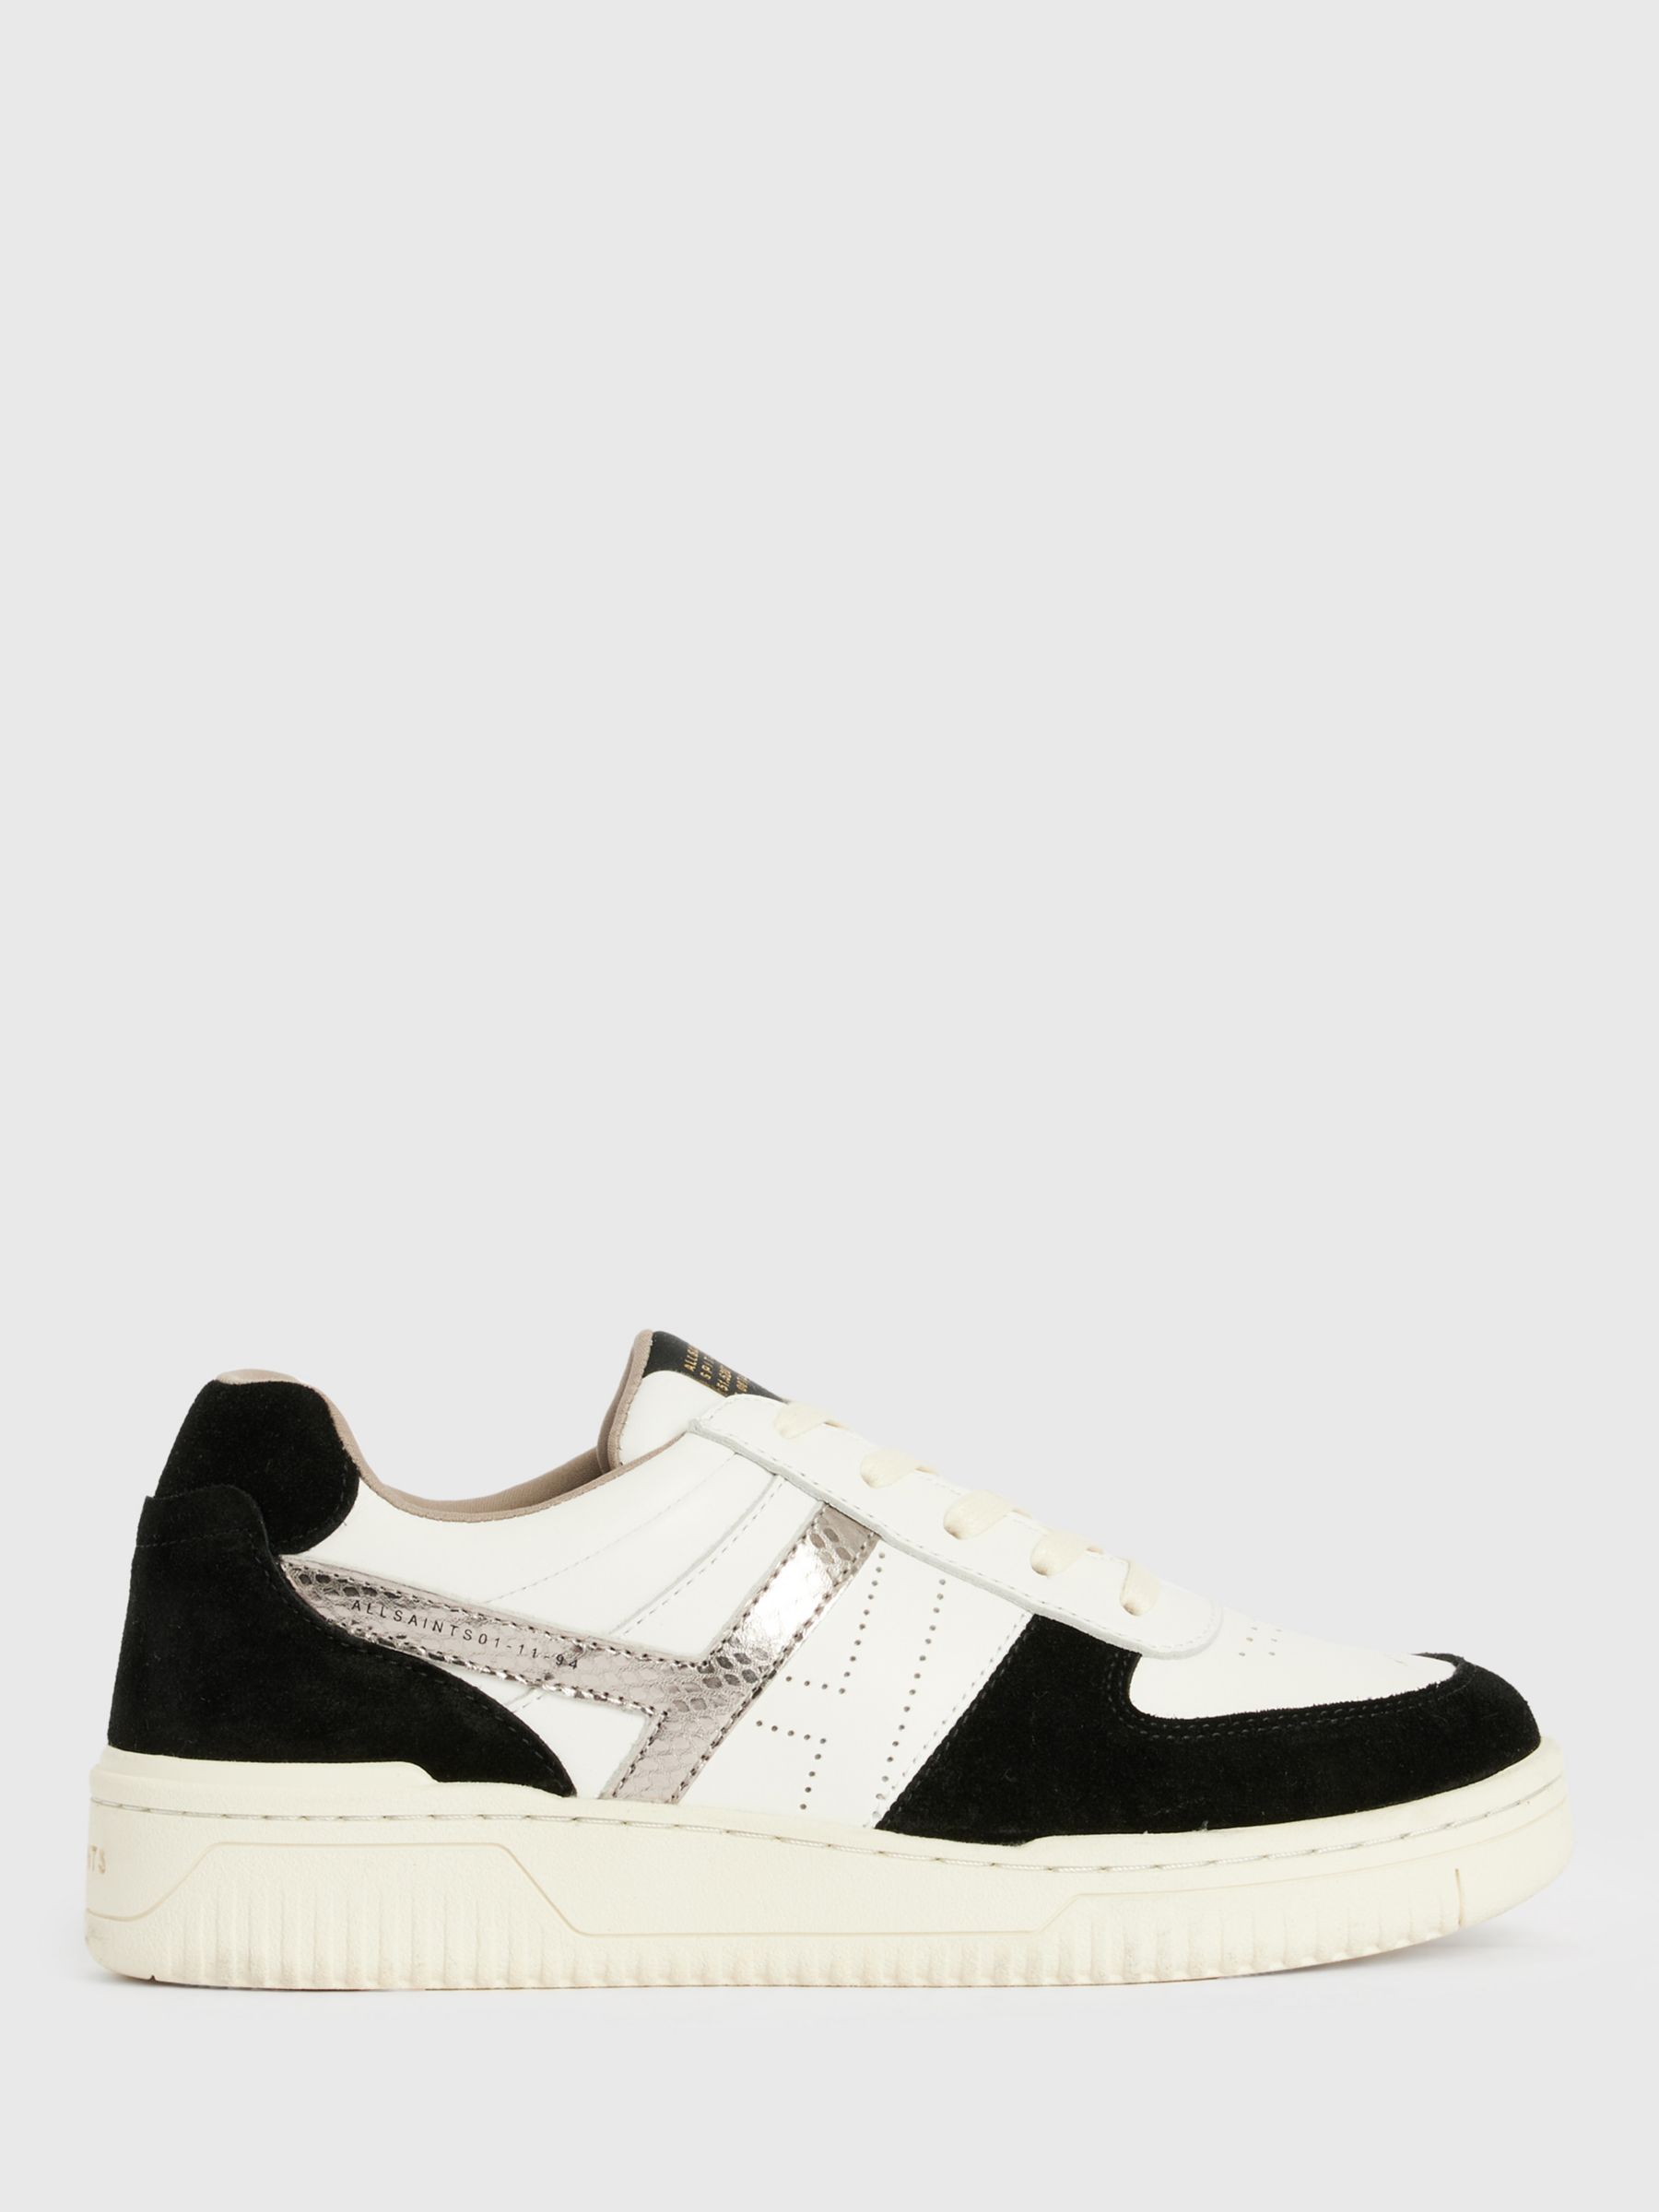 AllSaints Vix Low Top Leather and Suede Trainers, White/Black/Gunmetal ...